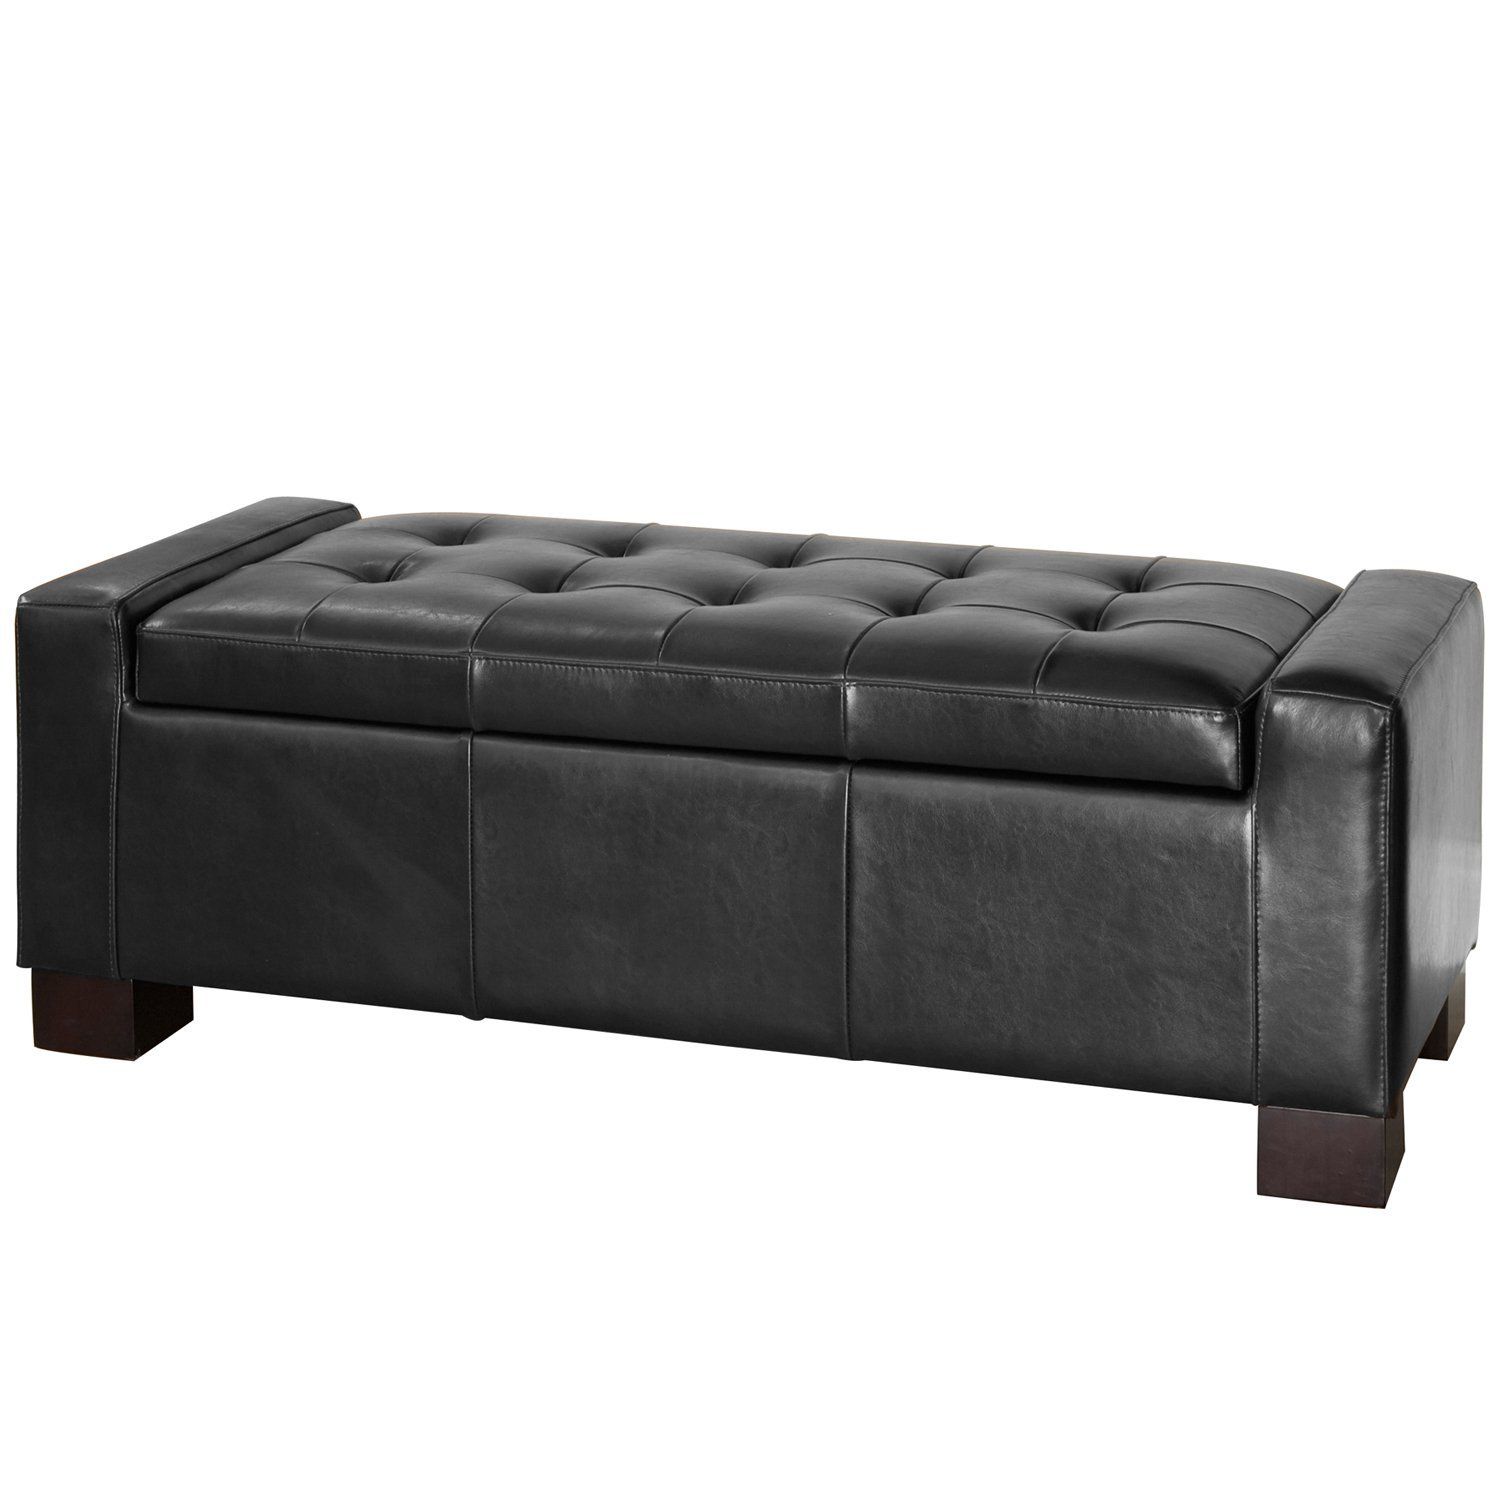 5 Best Black Leather Ottoman – Elegant Enough To Make Your Room With Regard To Black Leather Foot Stools (View 7 of 20)